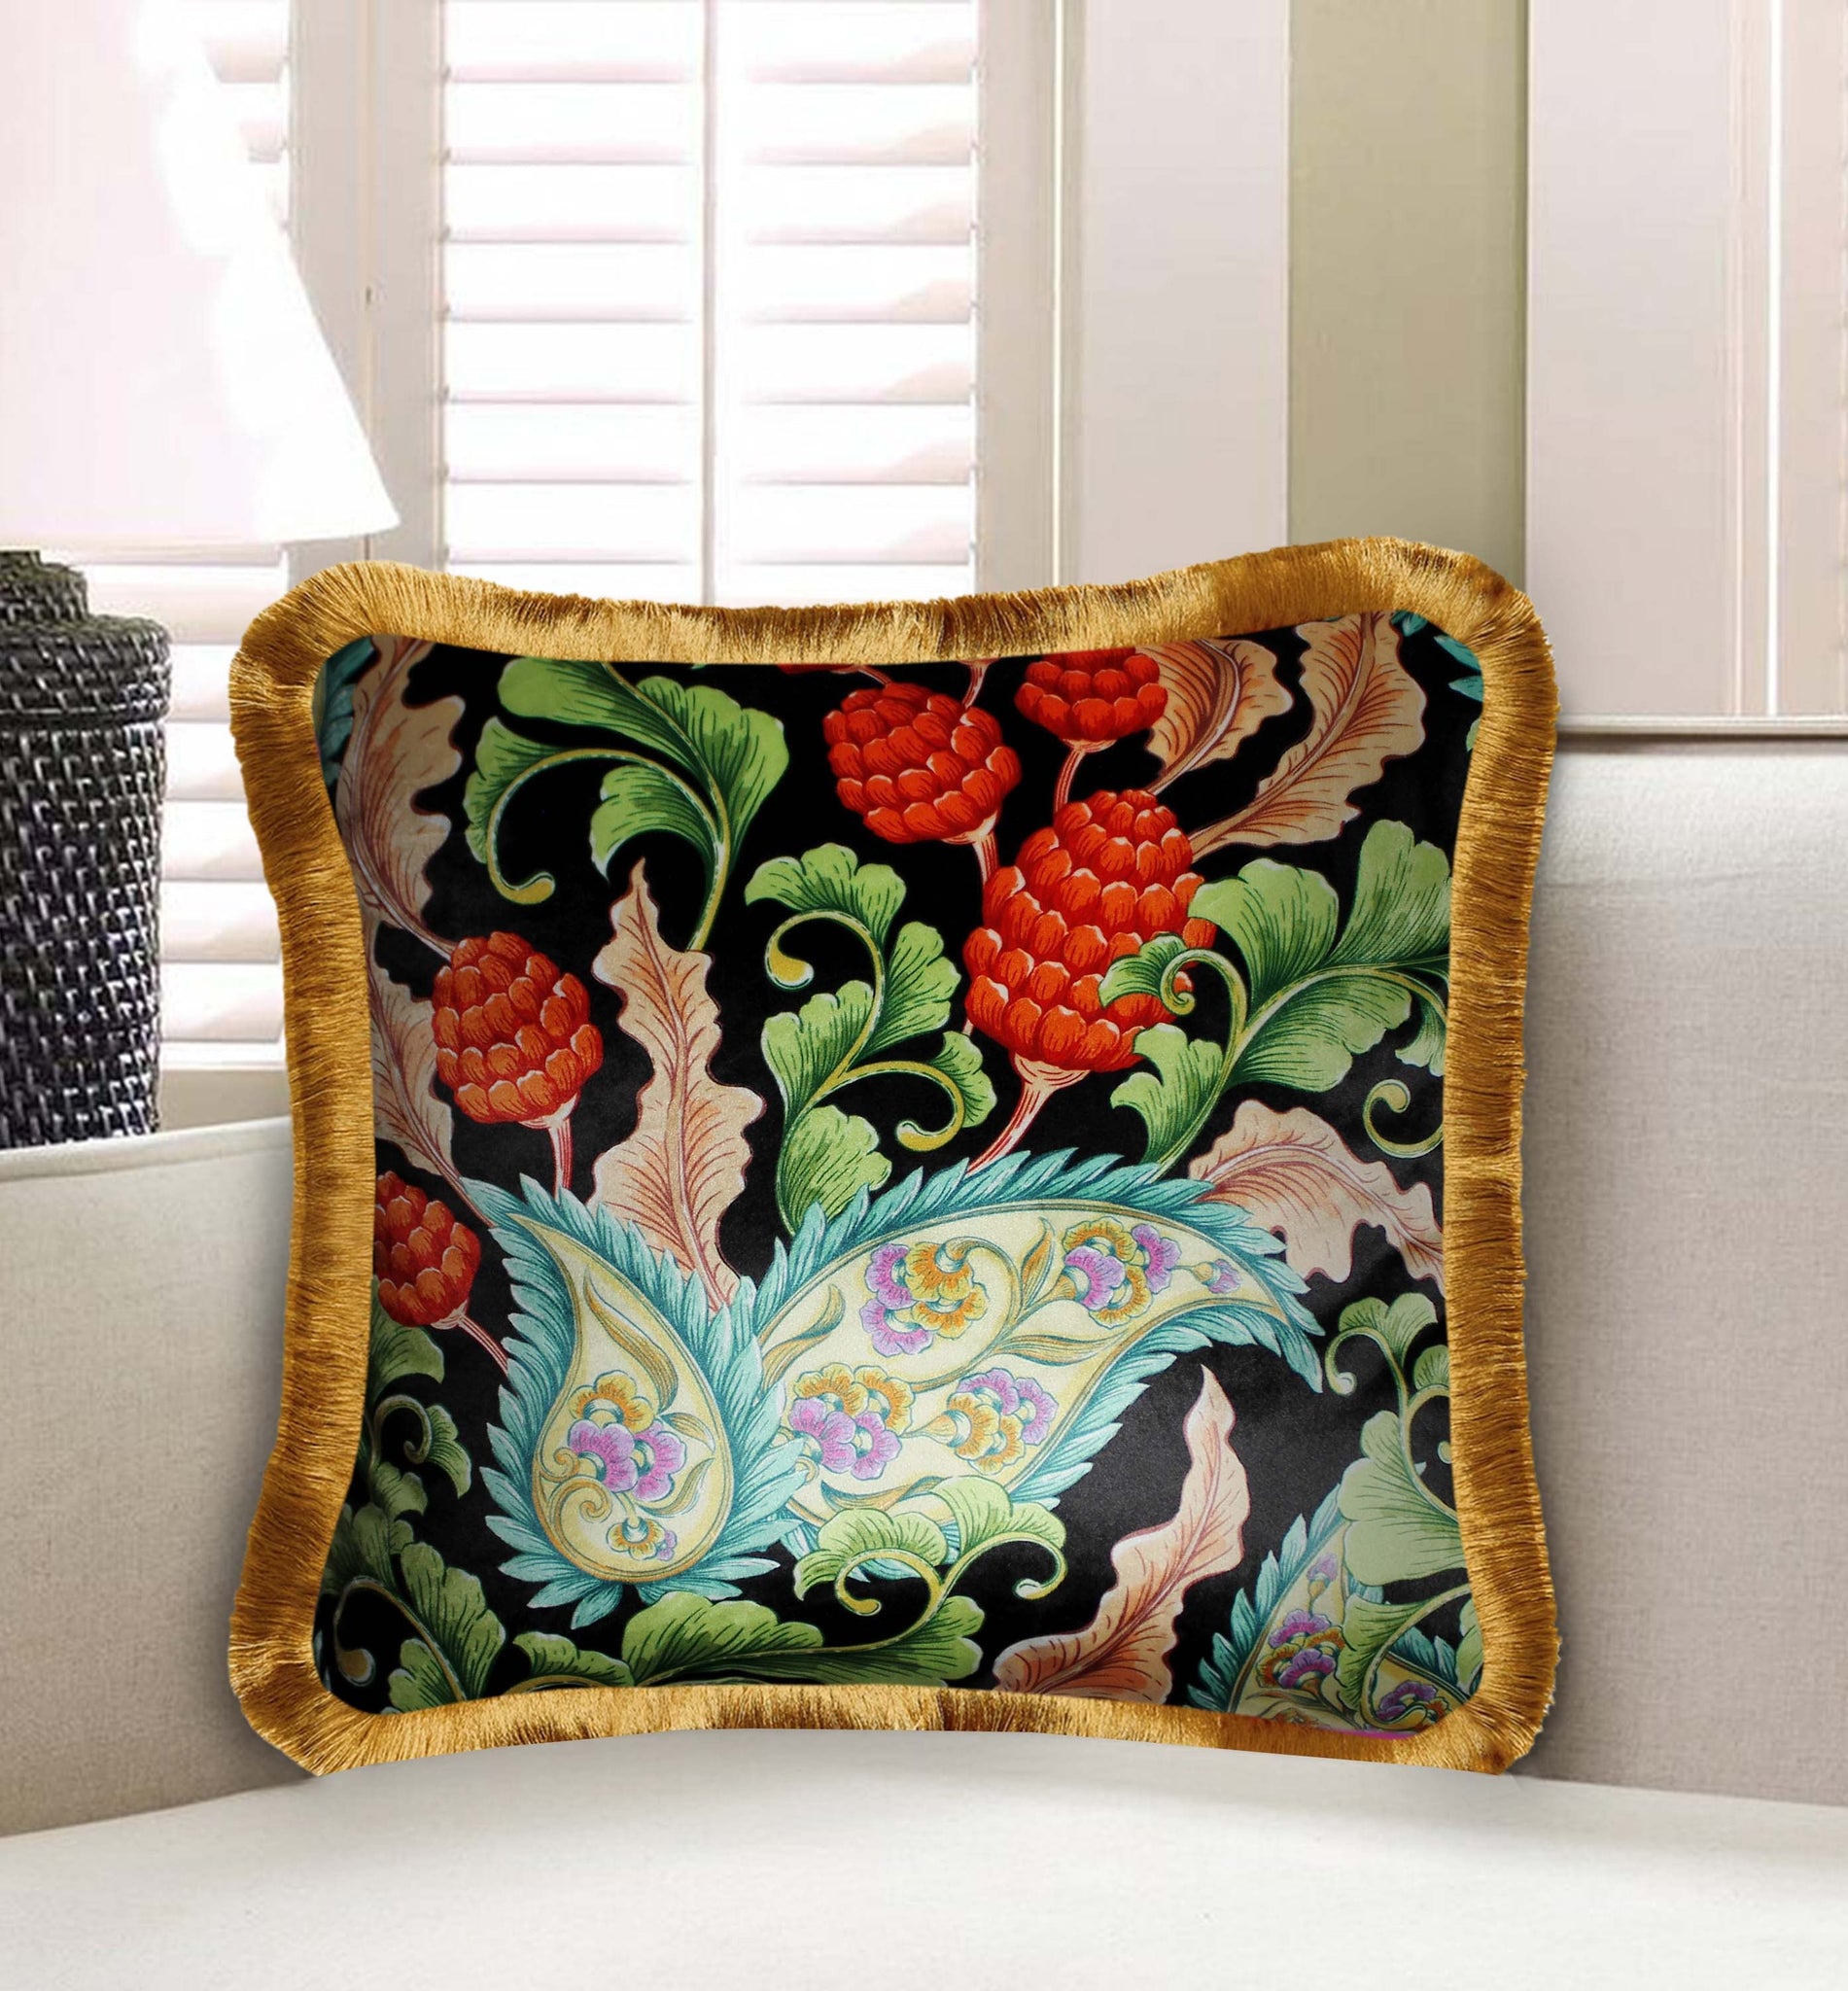 Black Velvet Cushion Cover Exotic Floral and Fruit Decorative Pillow Cover Home Decor Throw Pillow for Sofa Chair Bedroom 45x45 cm 18x18 In